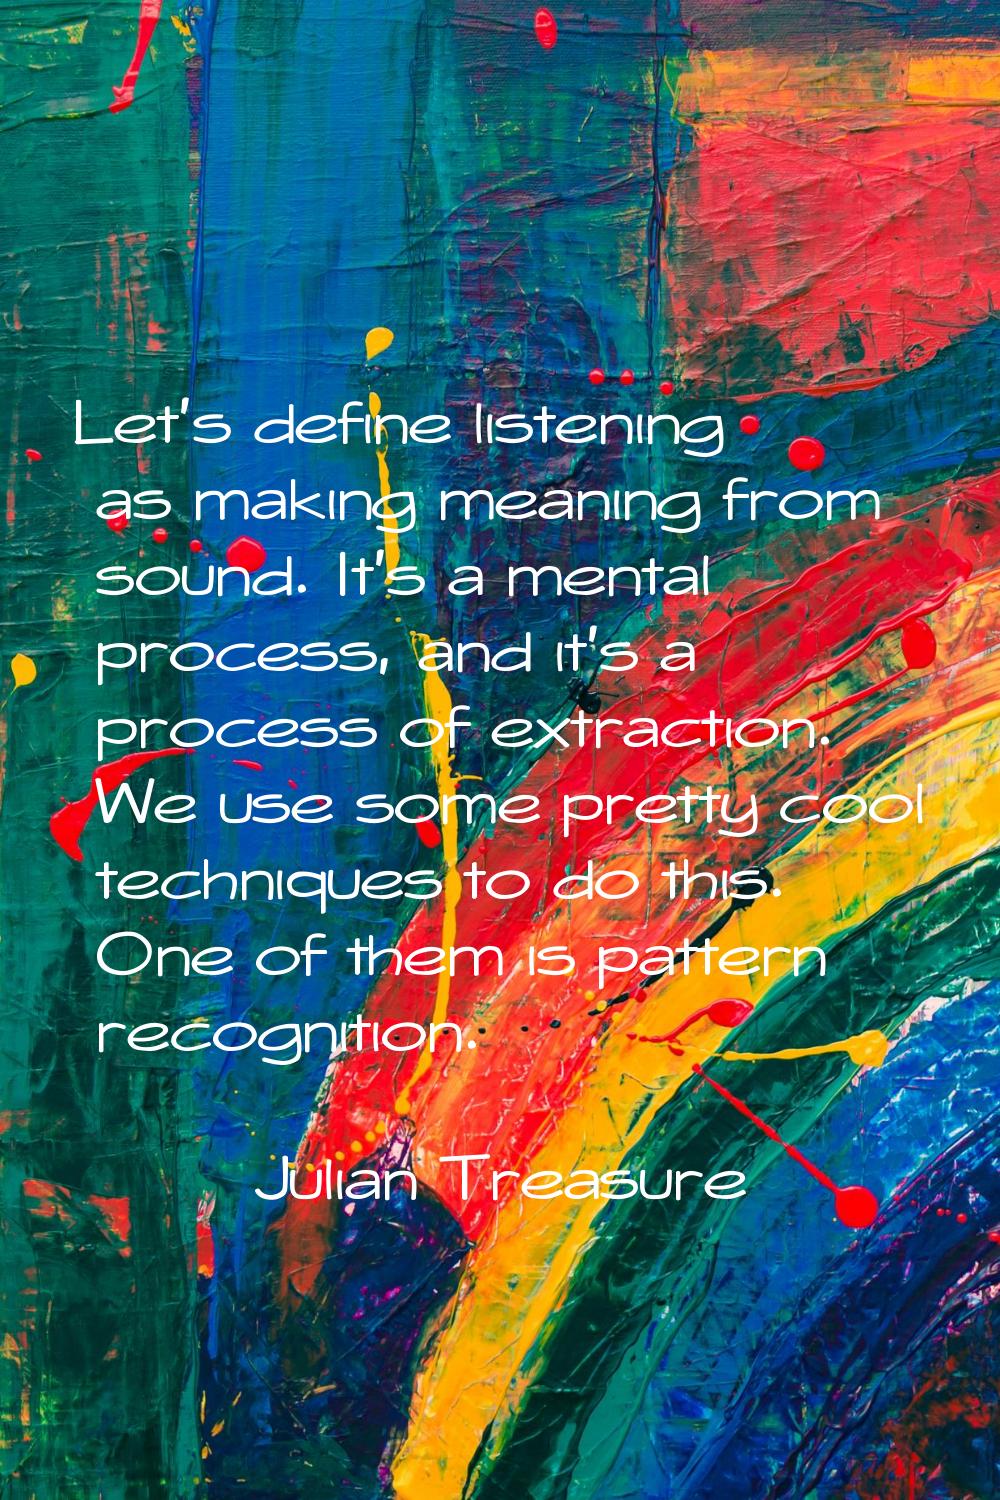 Let's define listening as making meaning from sound. It's a mental process, and it's a process of e